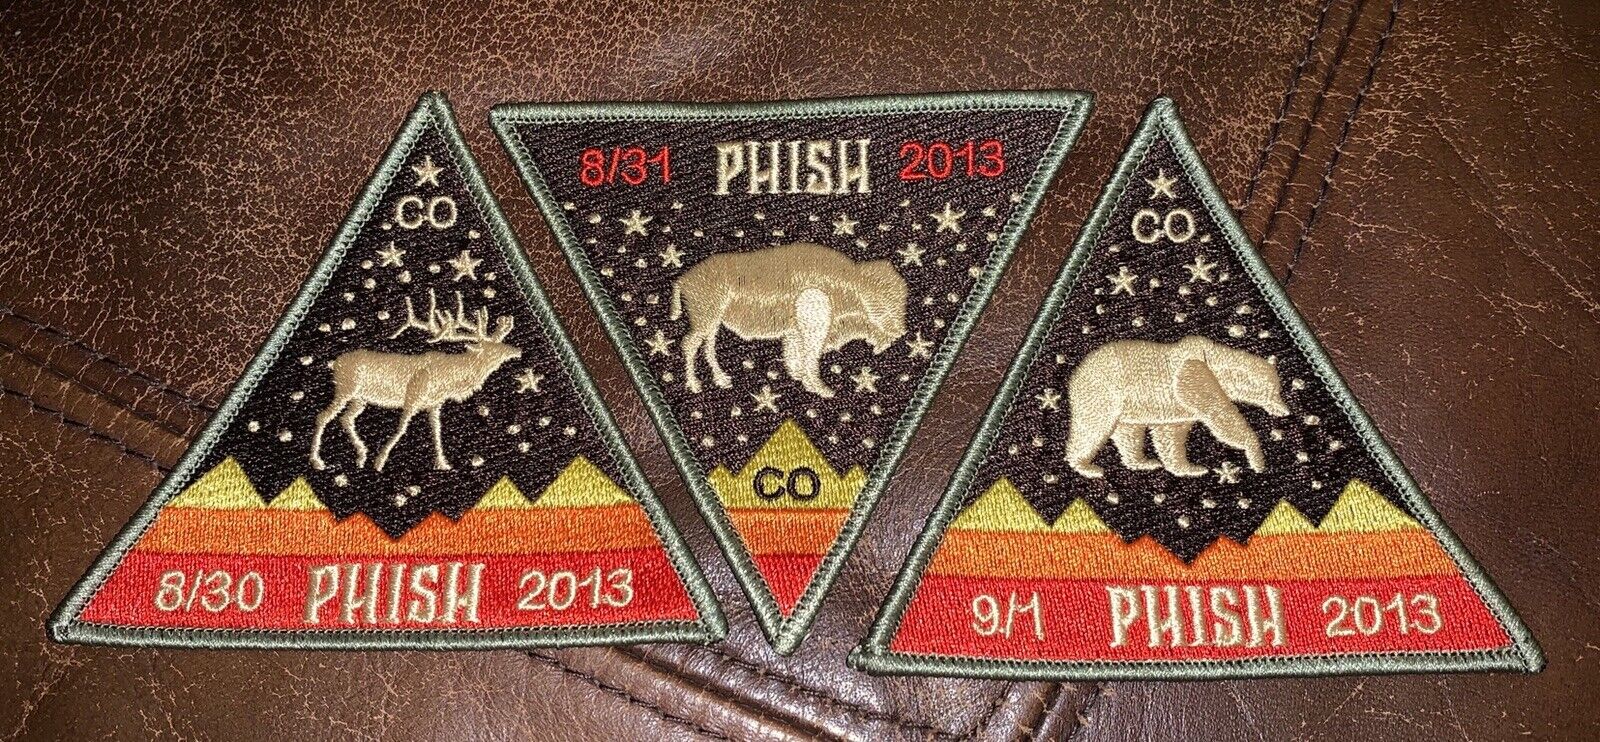 Year-end gift PHISH DICKS 2013 SET Bombing free shipping PATCH OFFICIAL